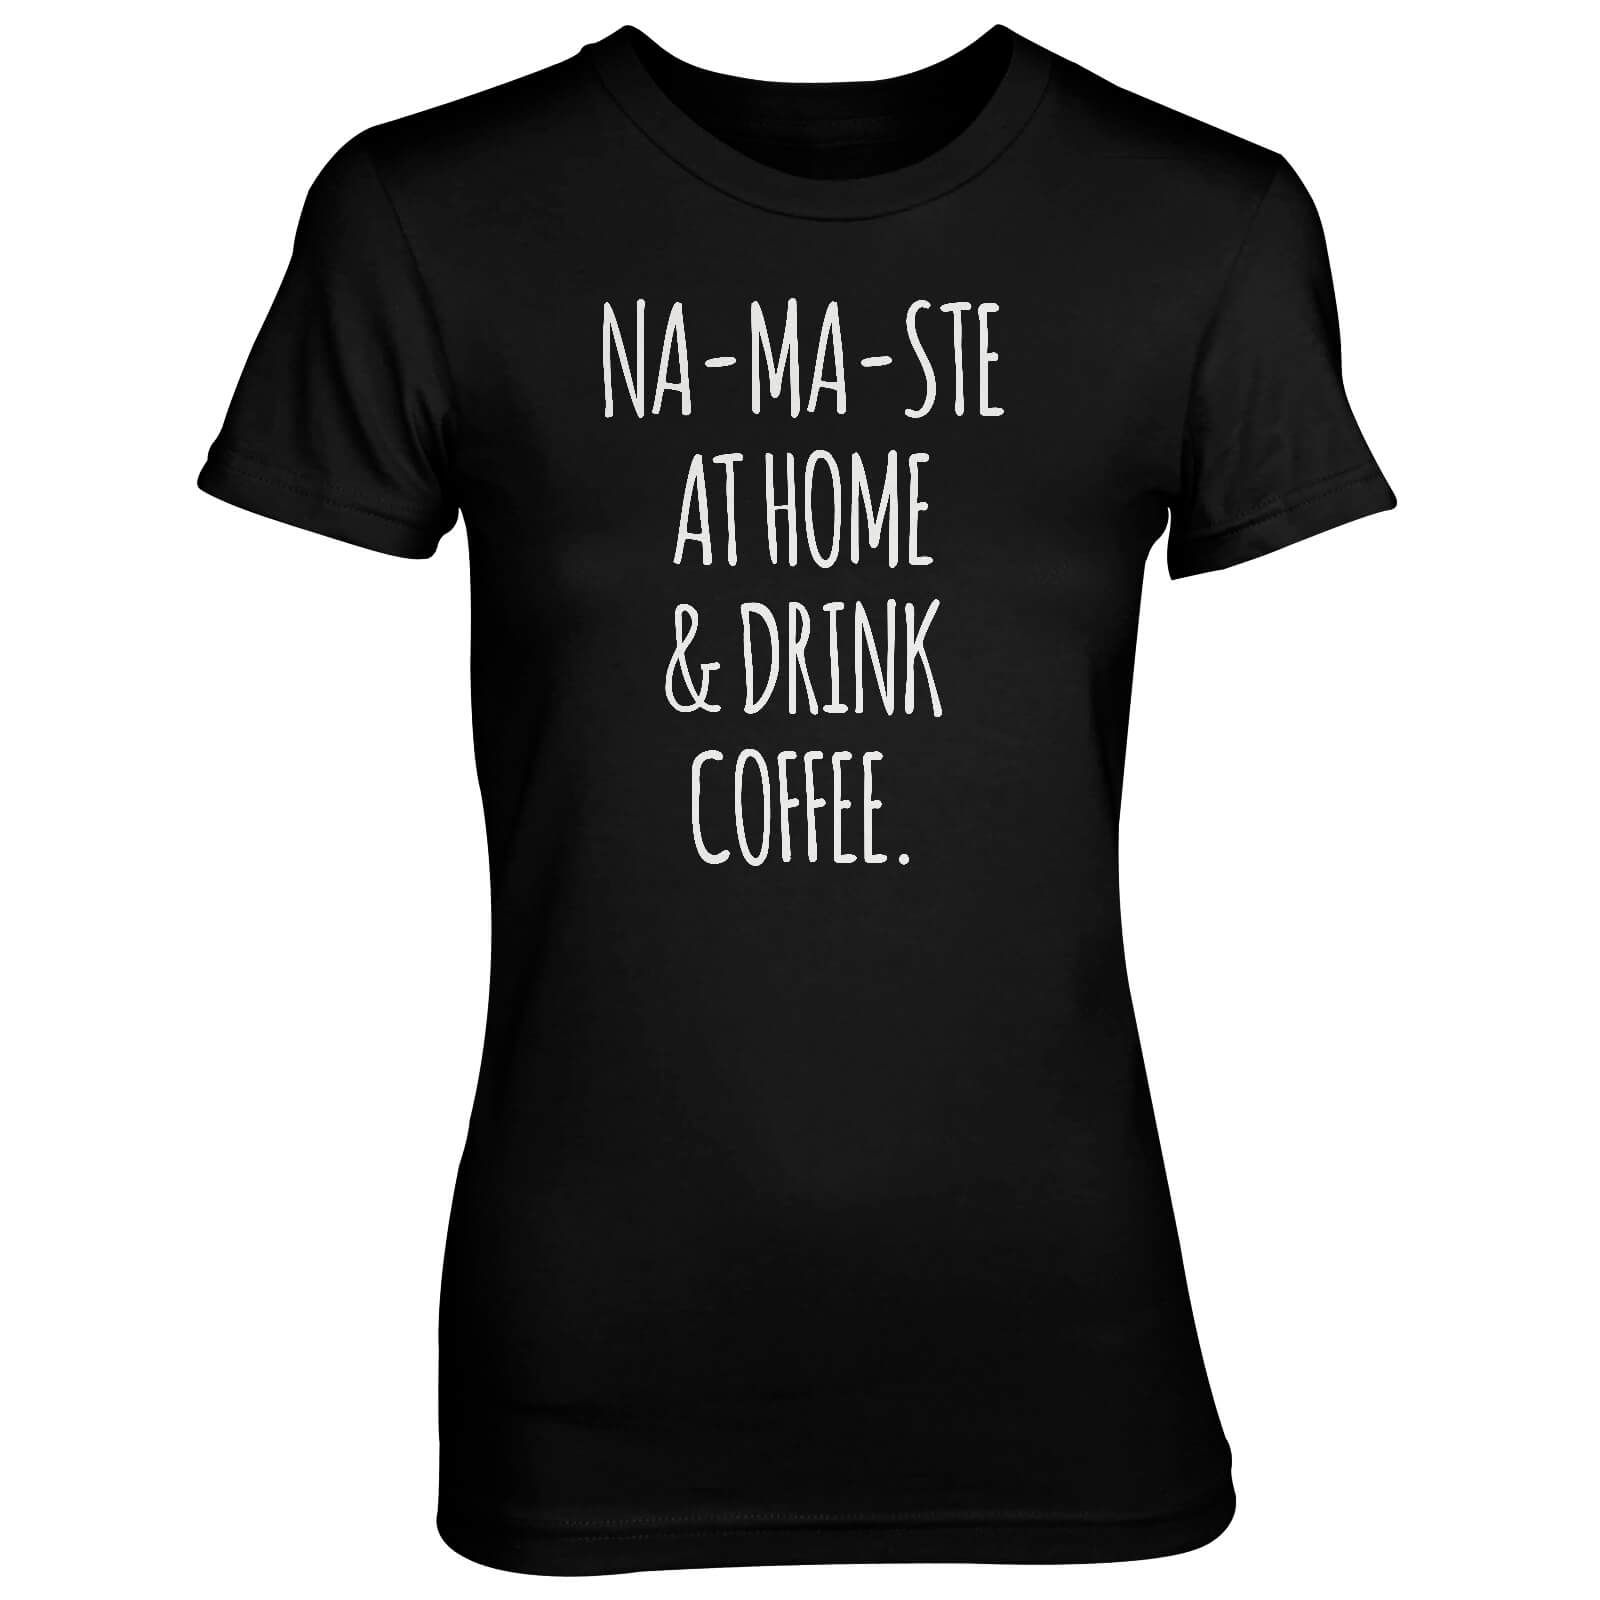 Na-Ma-Ste At Home And Drink Coffee Women's Black T-Shirt - S - Black